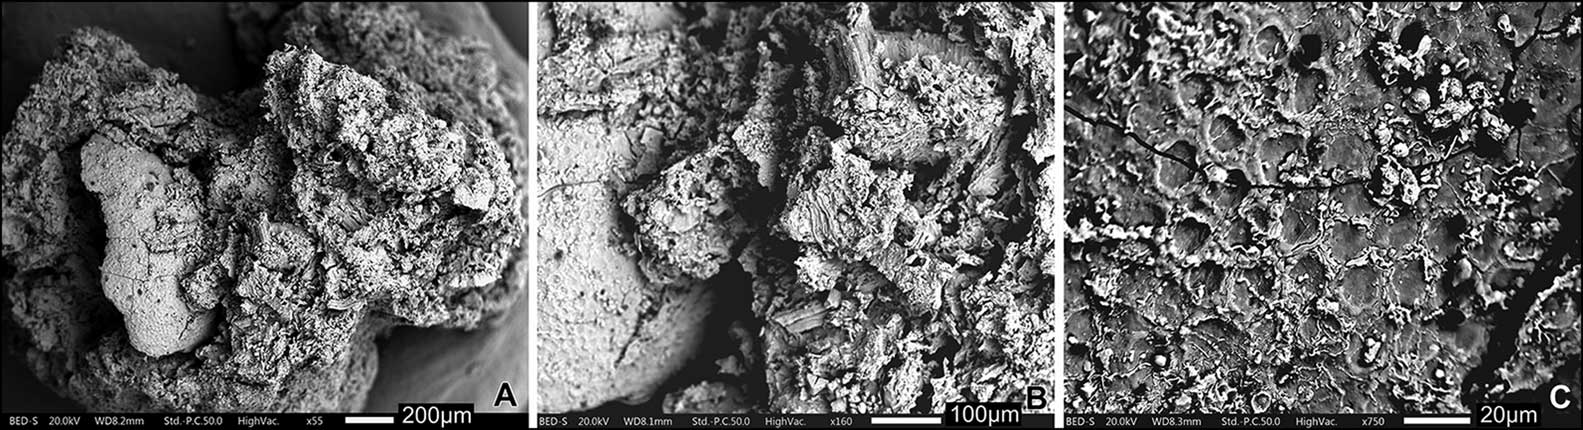 Three panels showing micrographs of a charred lump of food. A portion of a mustard seed is visible.